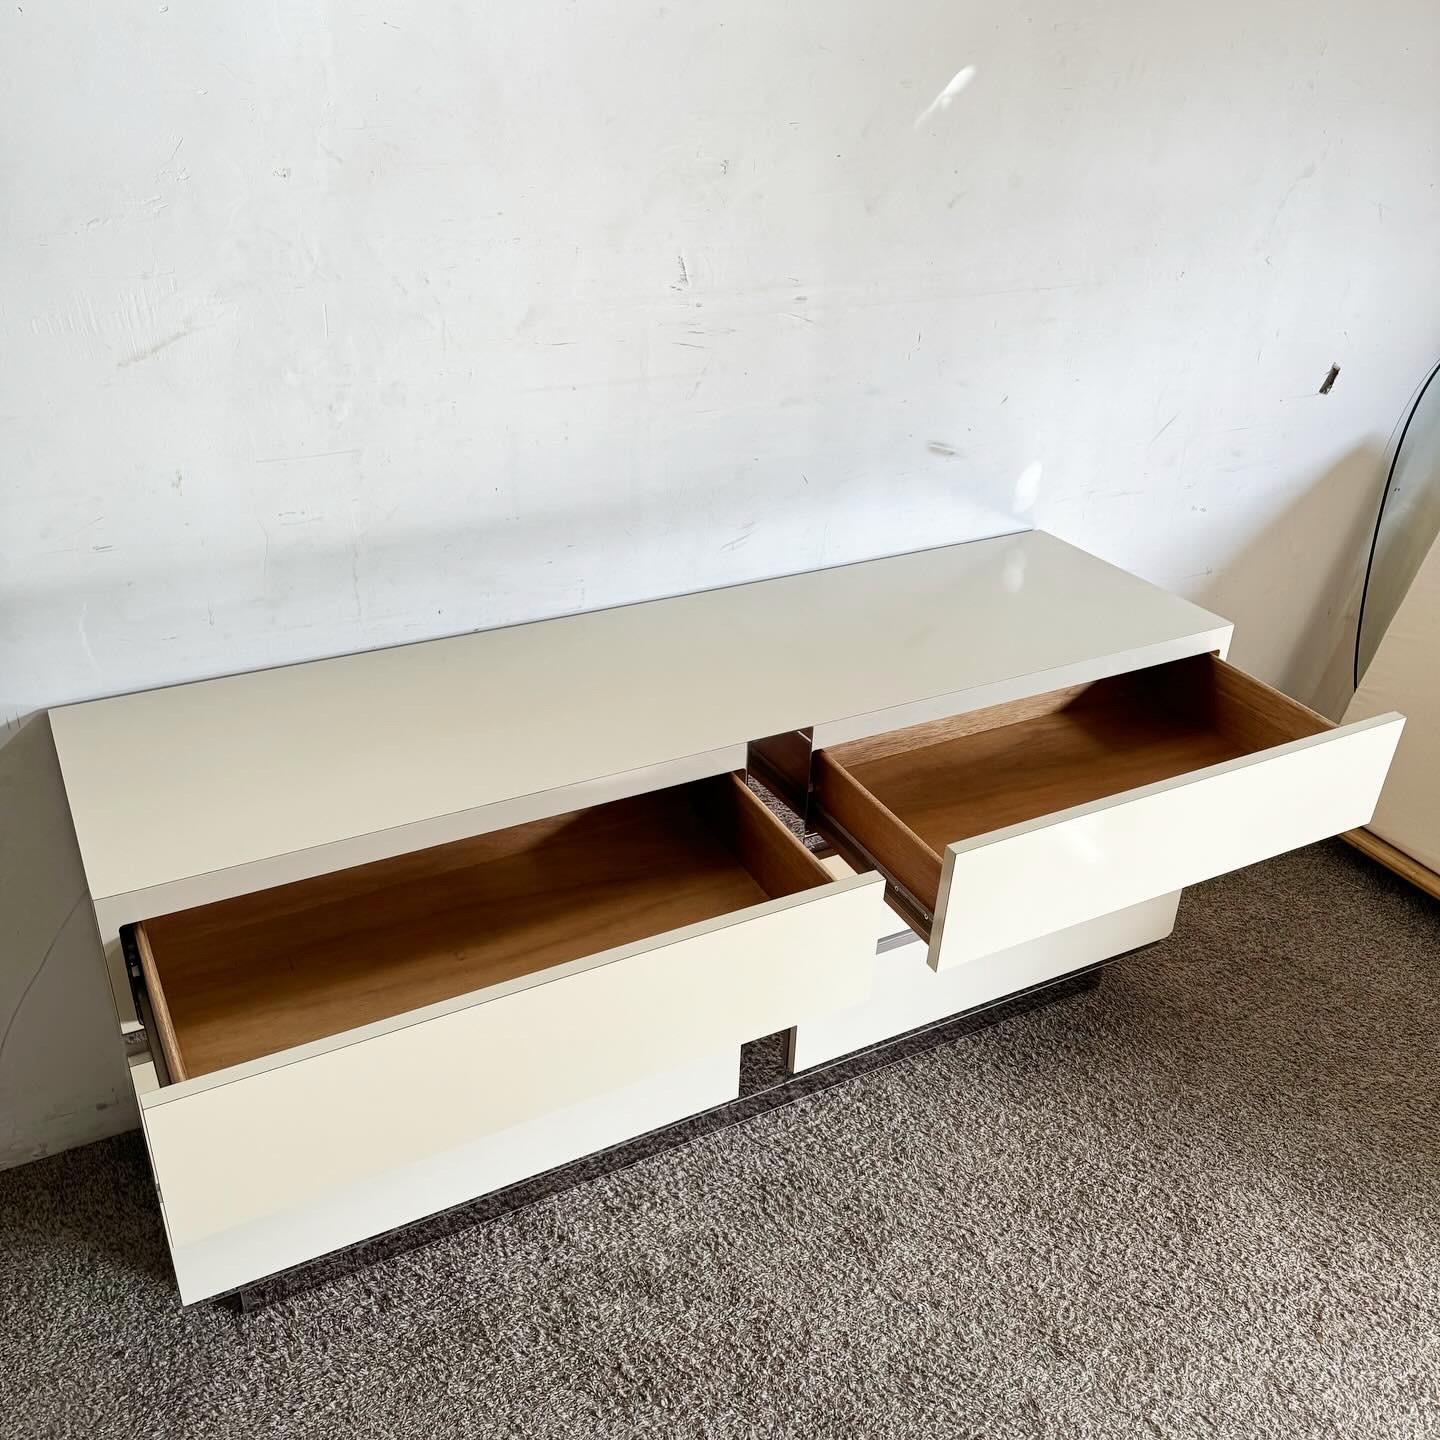 Late 20th Century Postmodern Cream Lacquer Laminate and Glass Mirror Dresser - 6 Drawers For Sale